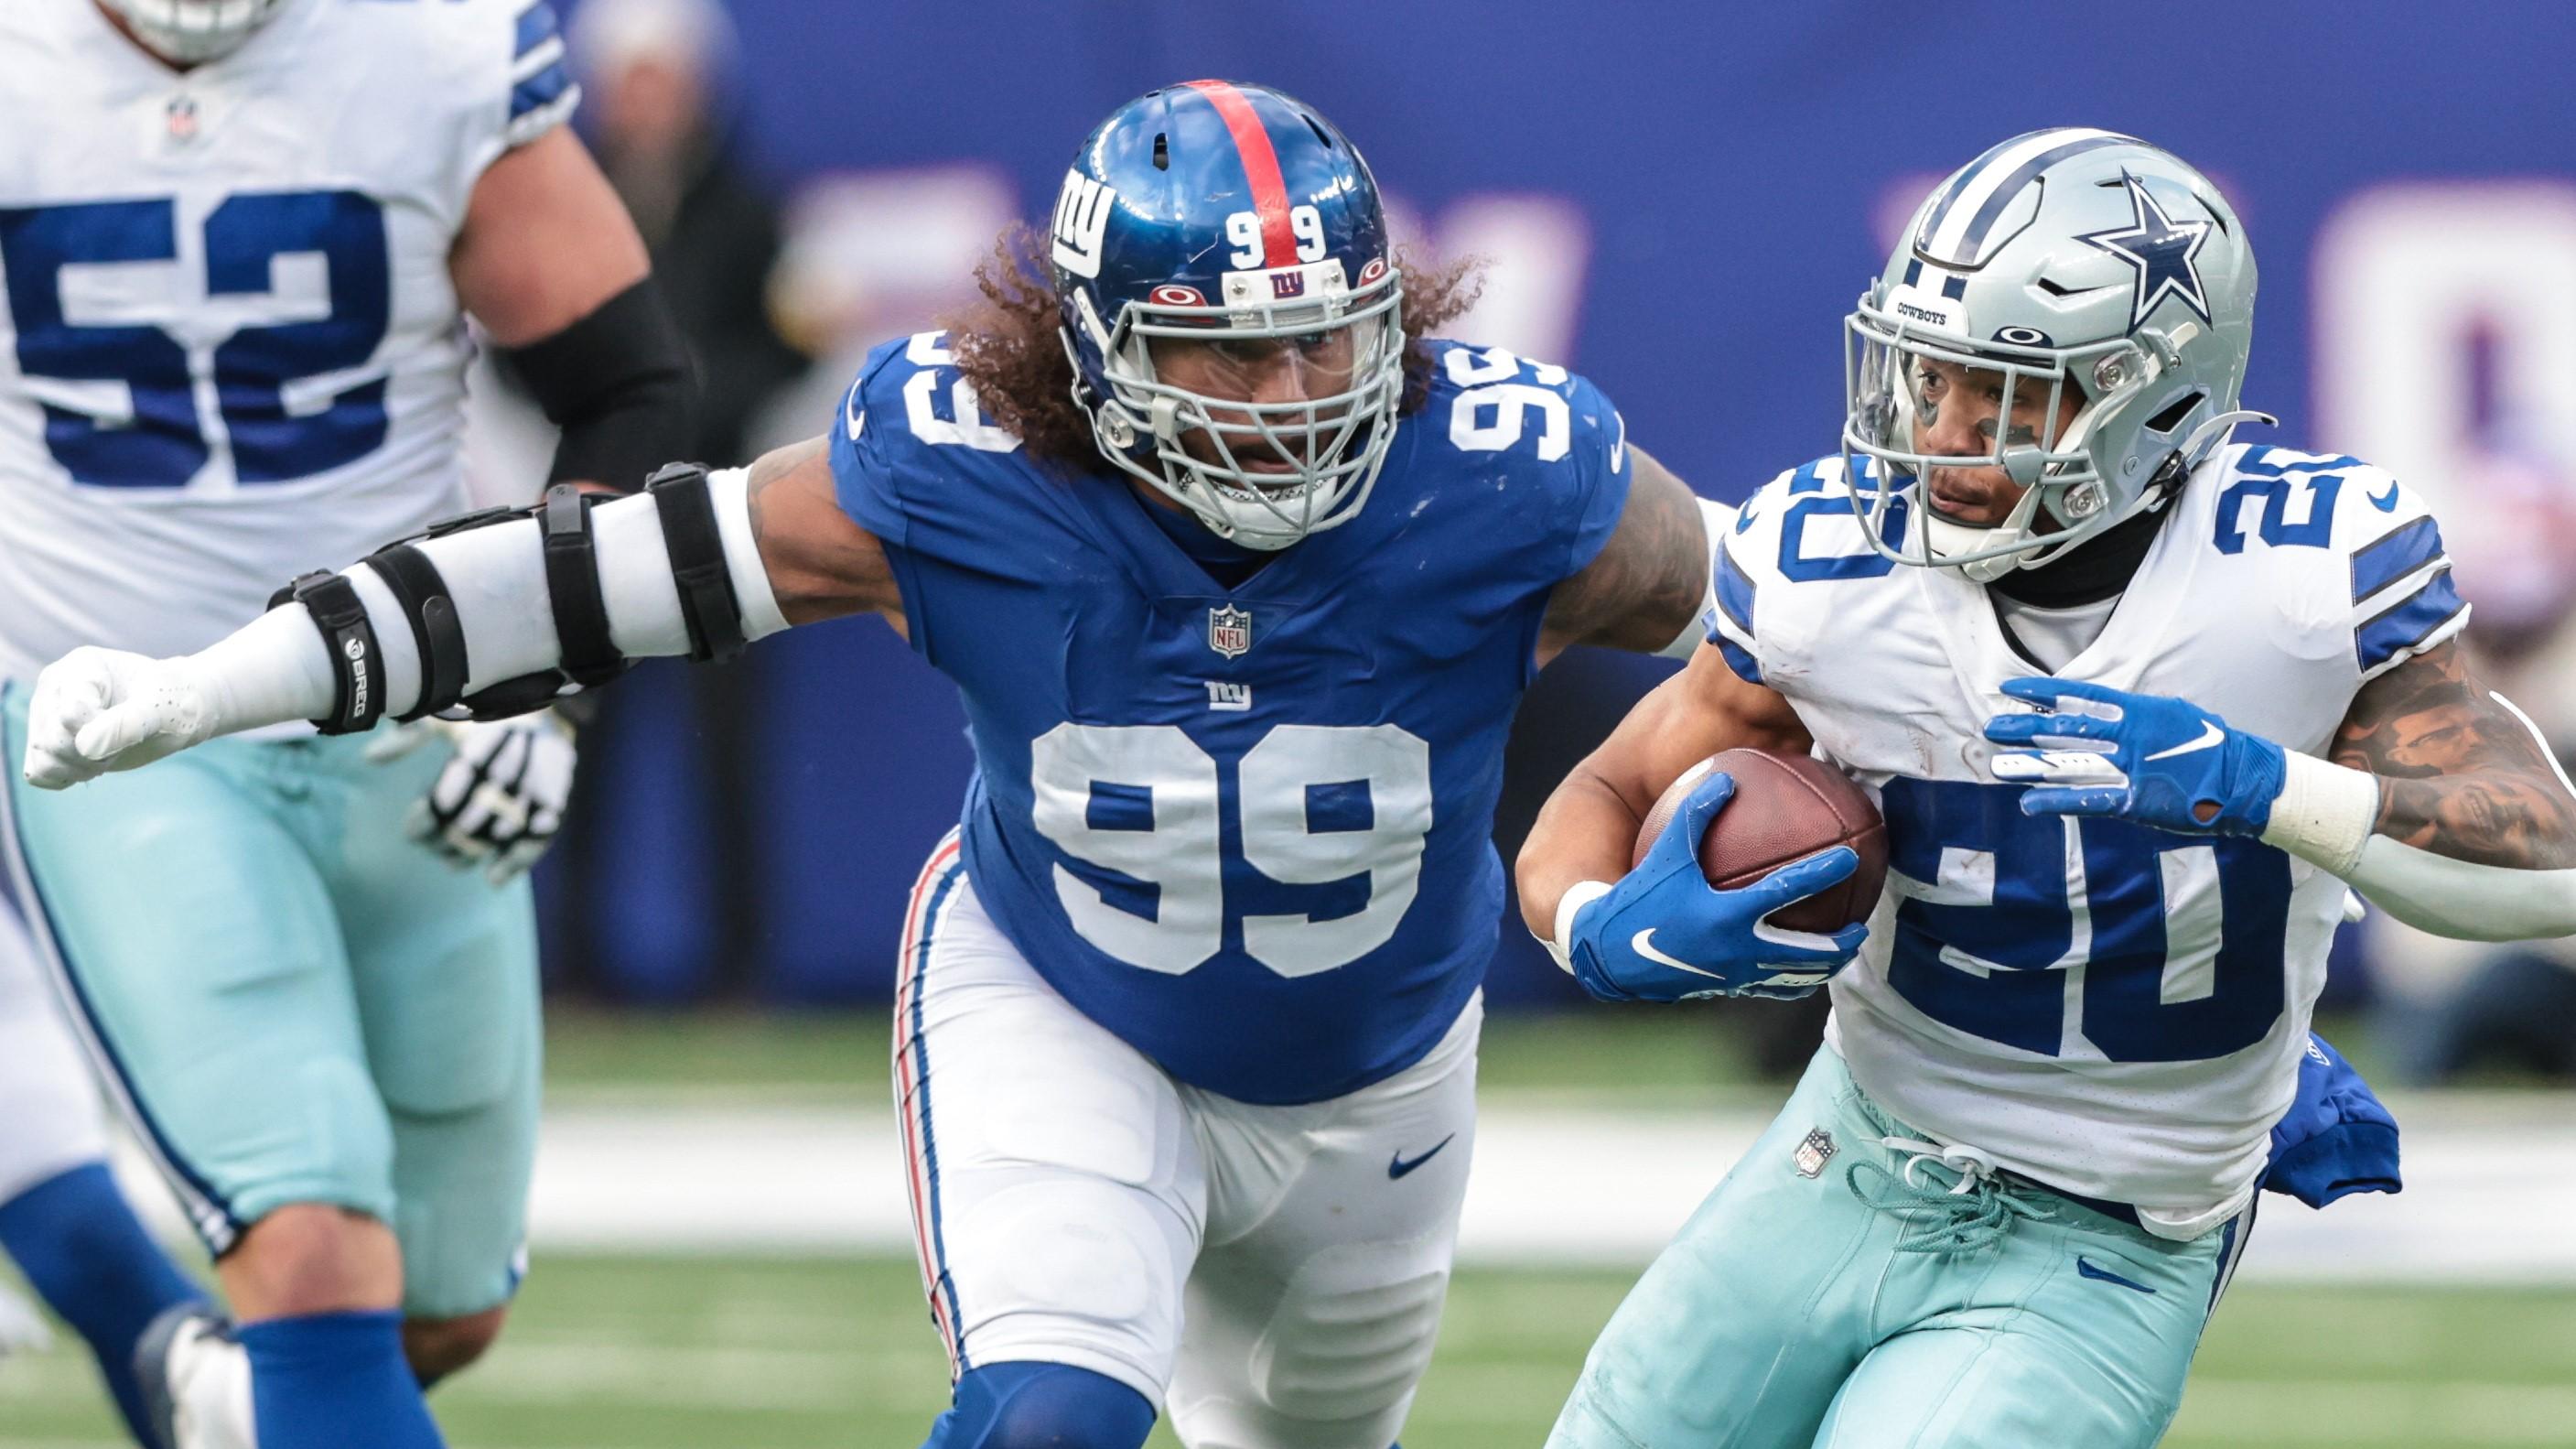 Dec 19, 2021; East Rutherford, New Jersey, USA; Dallas Cowboys running back Tony Pollard (20) carries the ball as New York Giants defensive end Leonard Williams (99) pursues during the second half at MetLife Stadium. Mandatory Credit: Vincent Carchietta-USA TODAY Sports / Vincent Carchietta-USA TODAY Sports